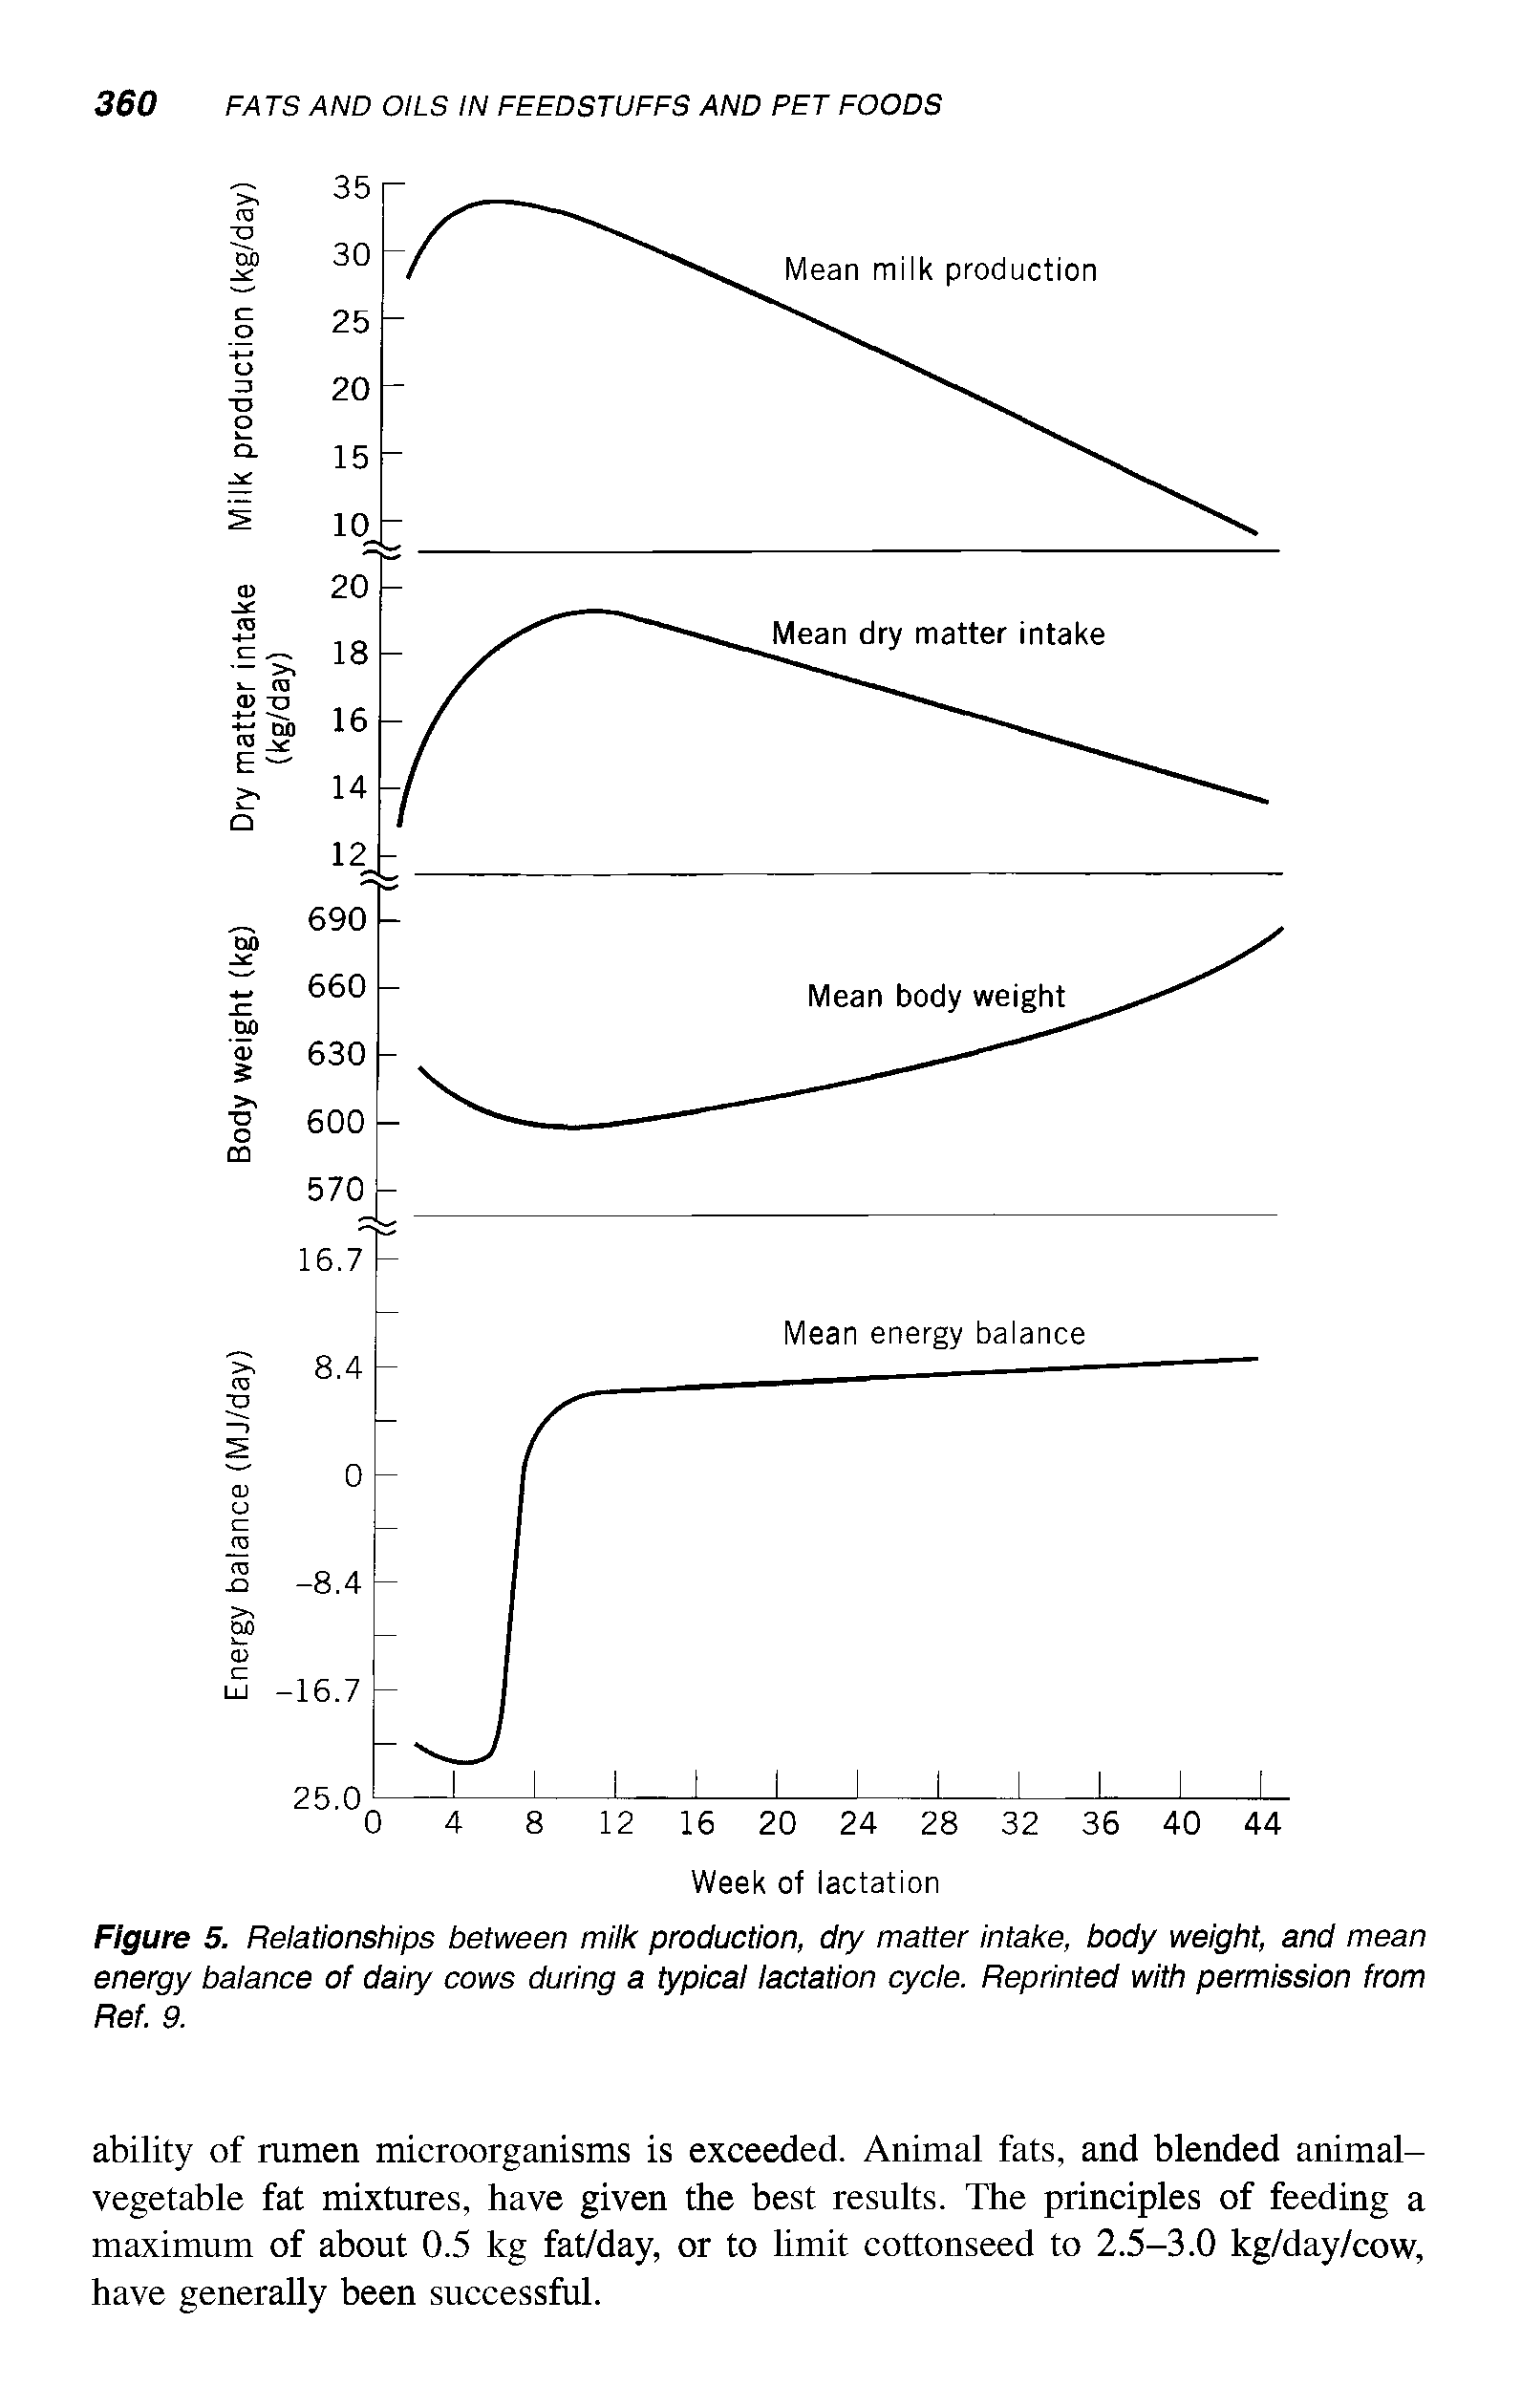 Figure 5. Relationships between milk production, dry matter intake, body weight, and mean energy balance of dairy cows during a typical lactation cycle. Reprinted with permission from Ref. 9.